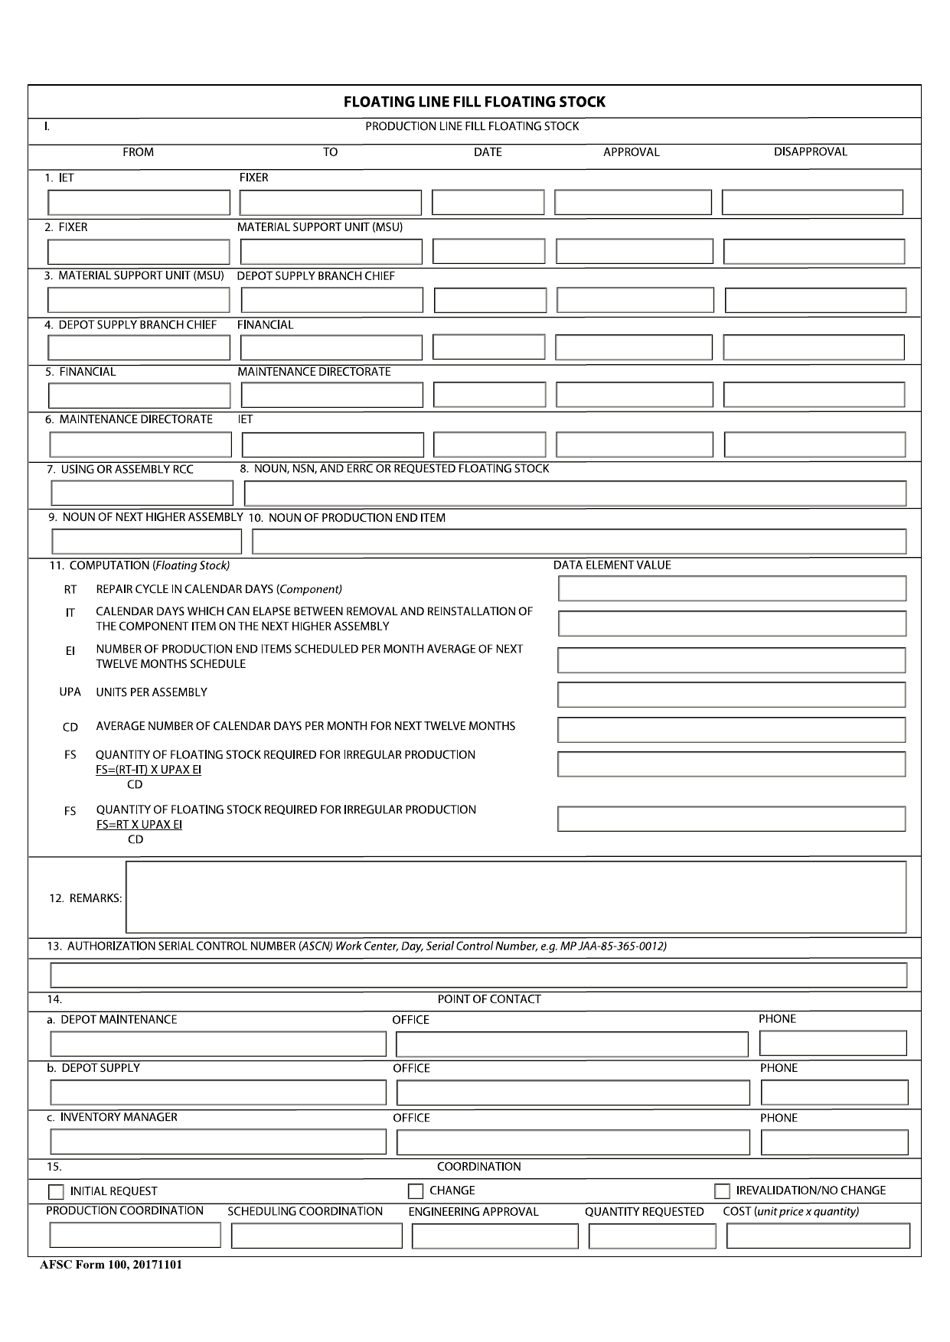 AFSC Form 100 Floating Line Fill Floating Stock, Page 1